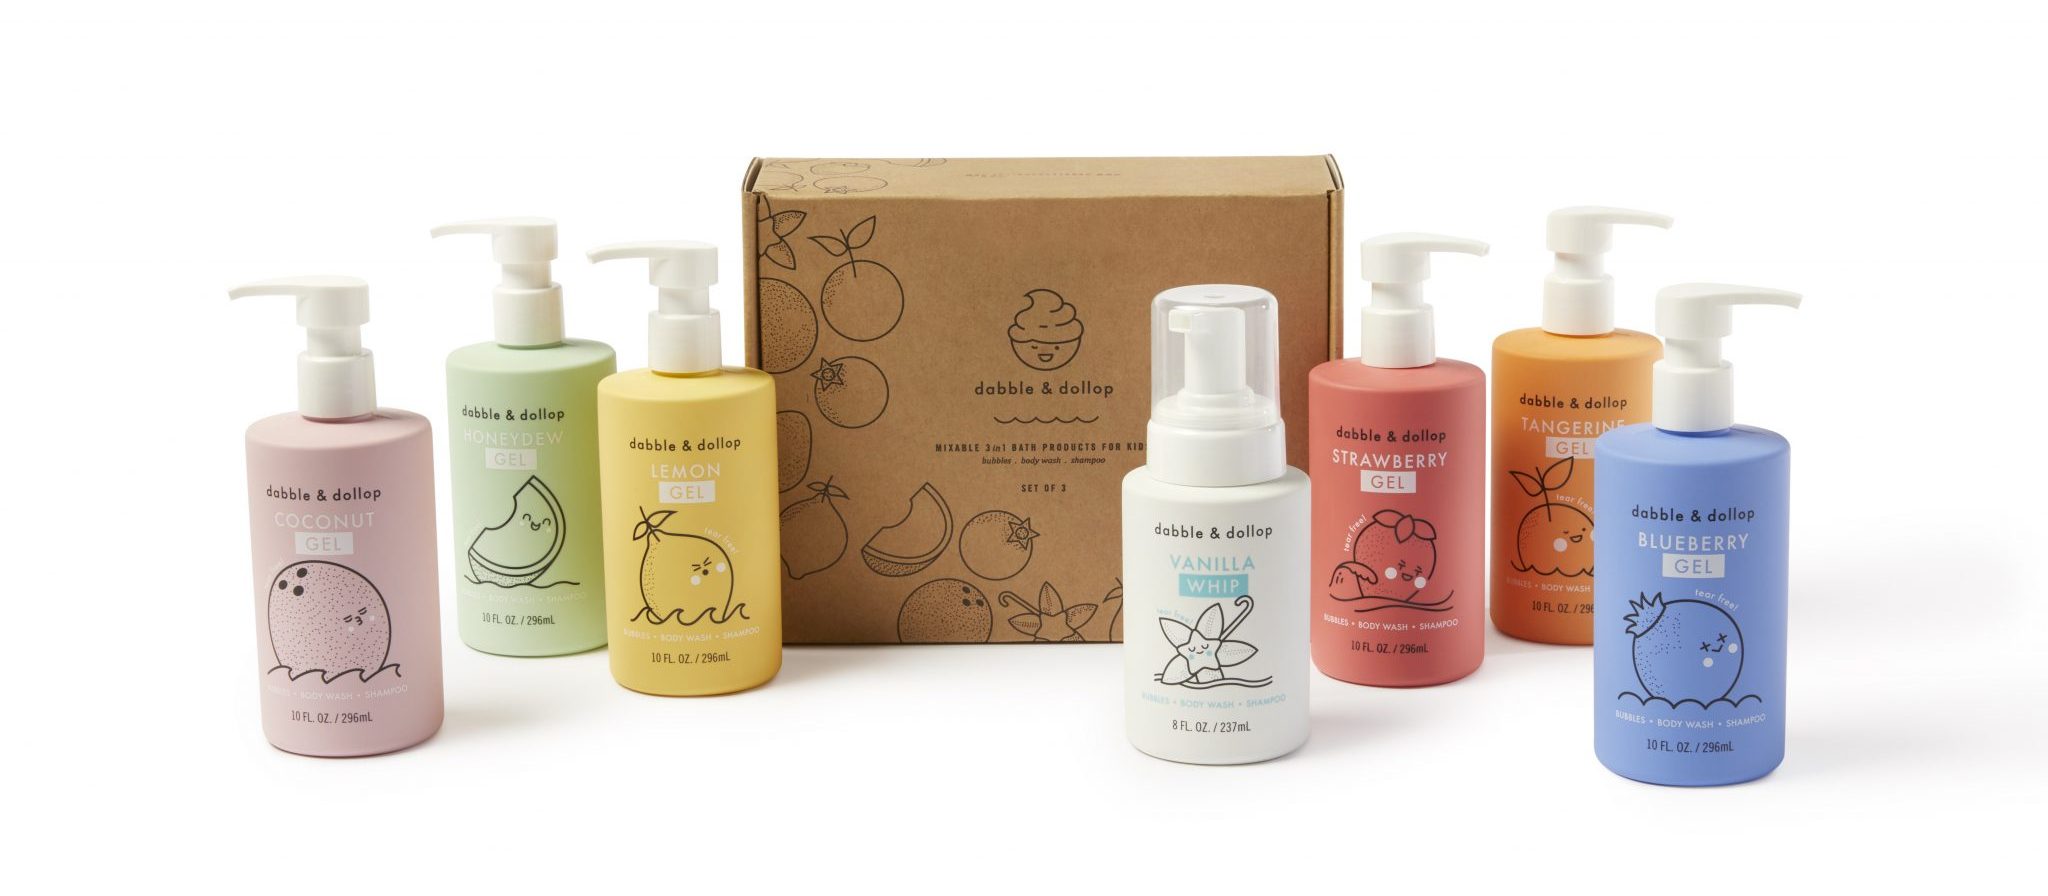 Dabble & Dollop Limited Edition Products for Holidays